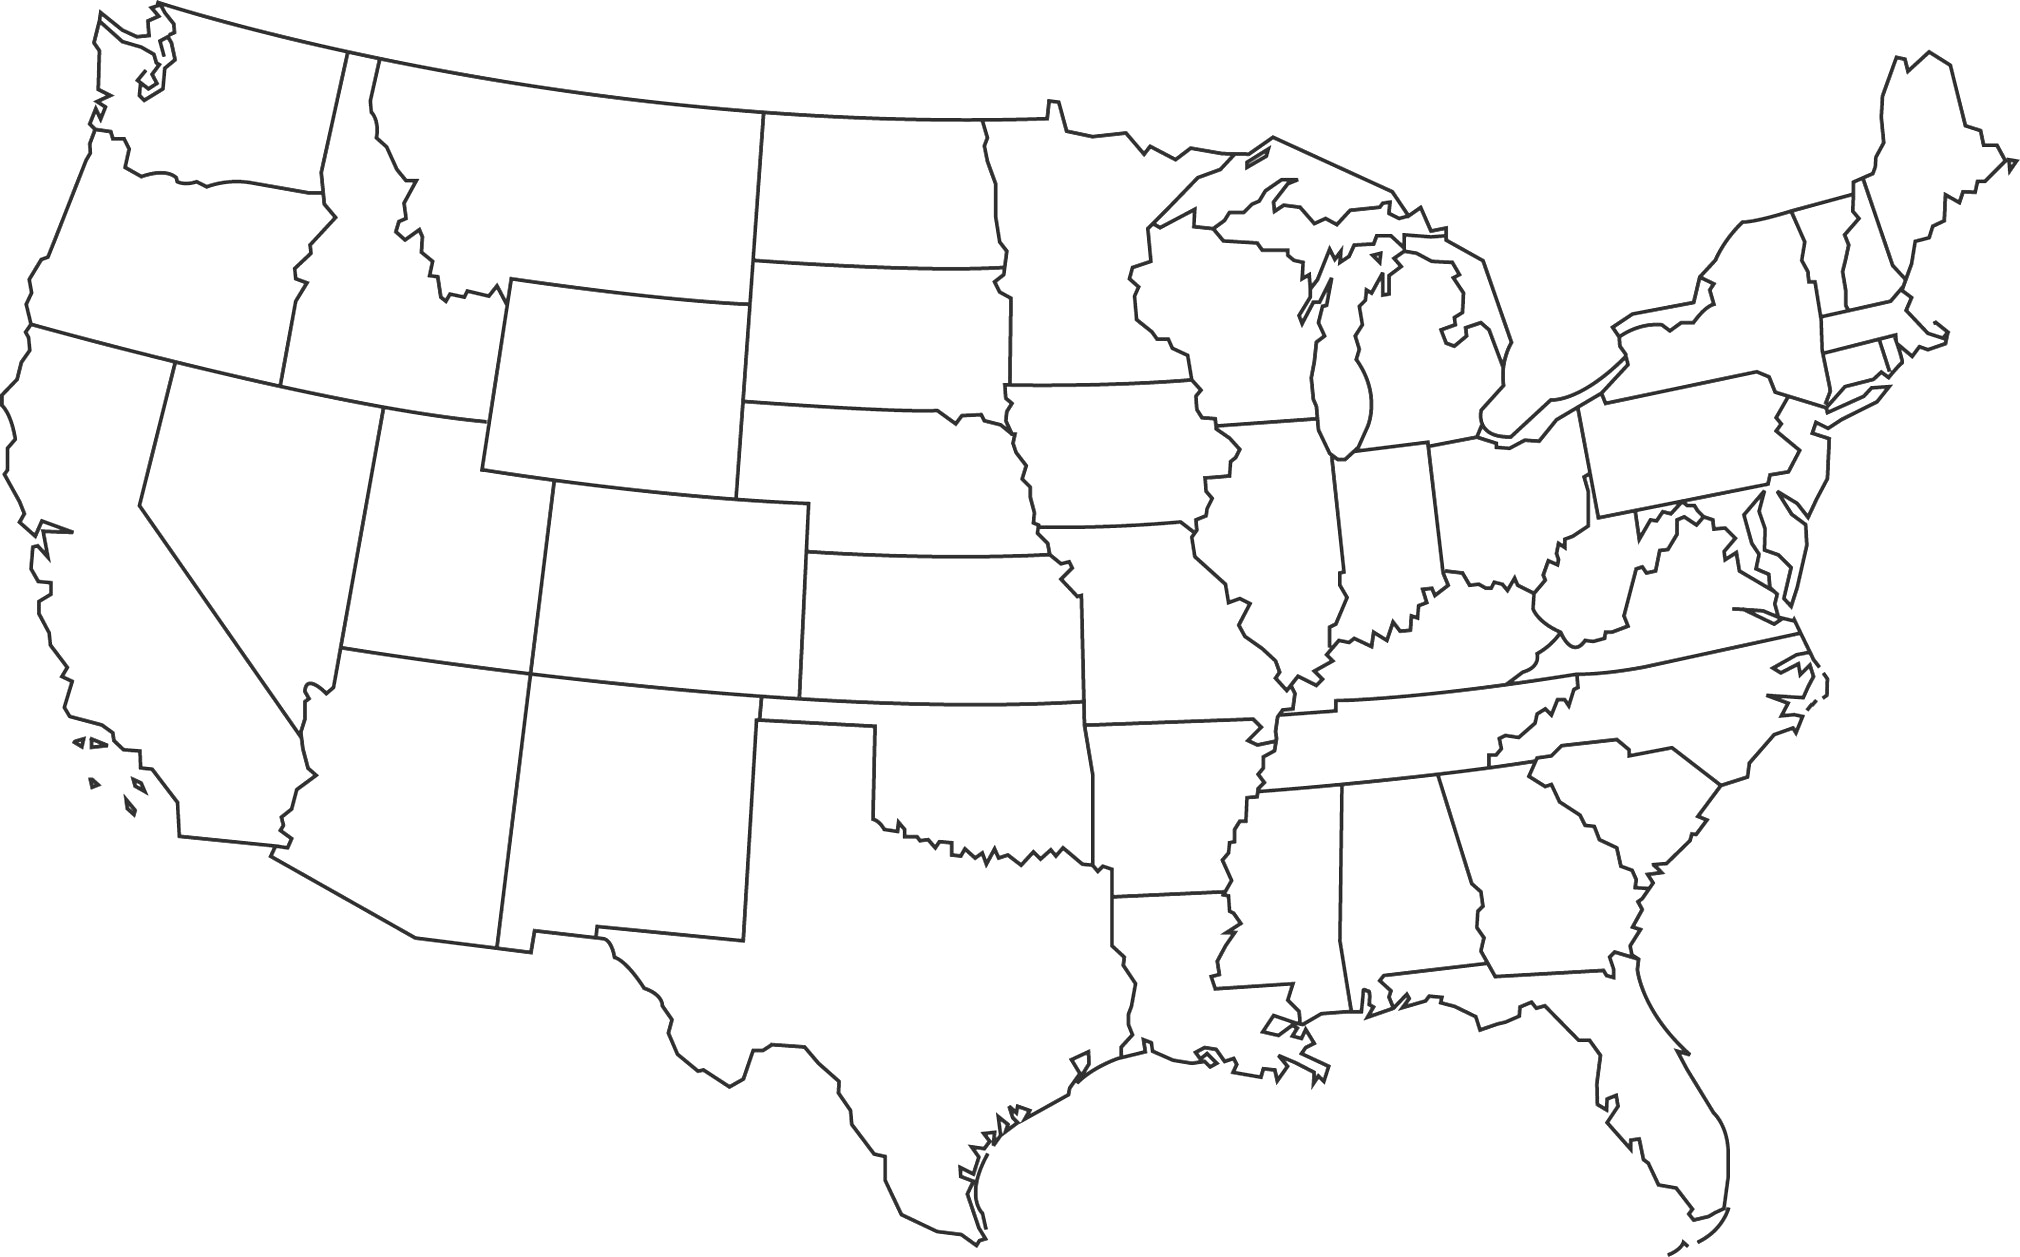  How To Draw The Usa Map in the world The ultimate guide 